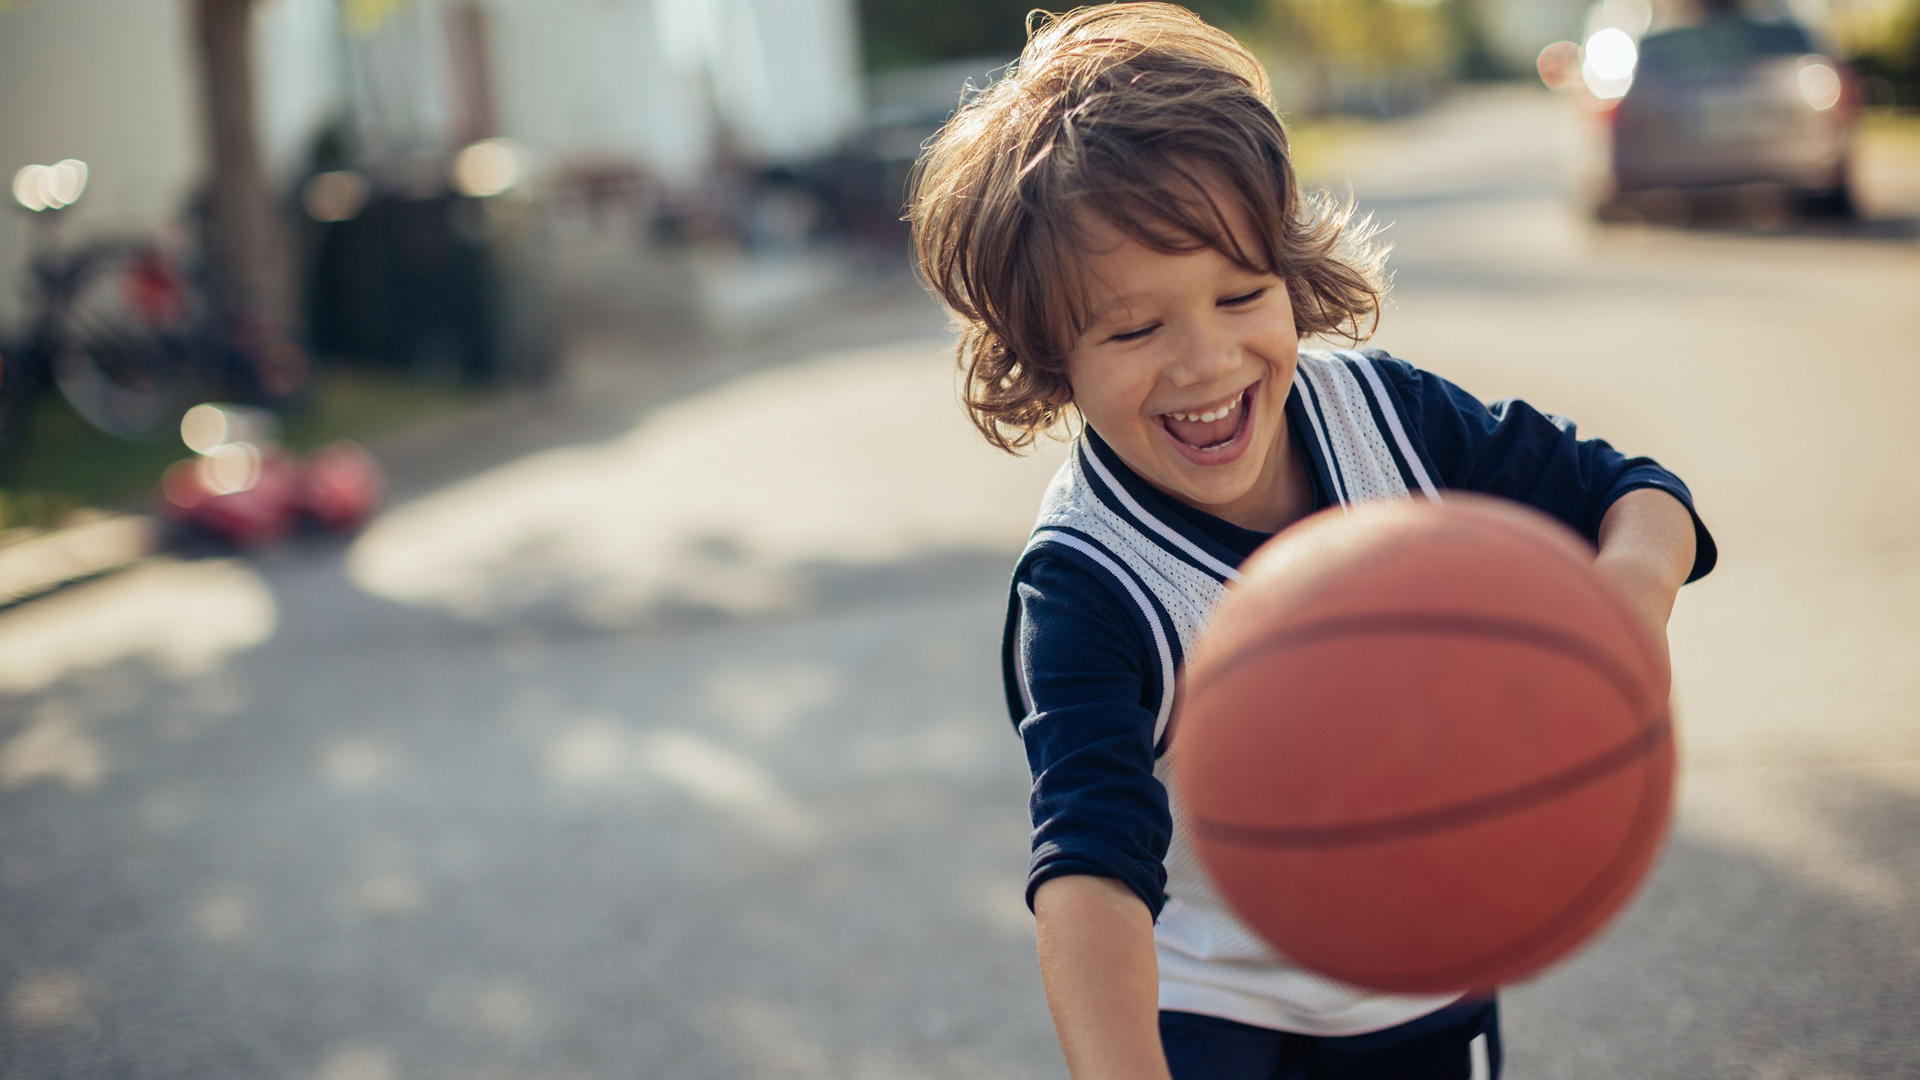 Little boy is smiling while  playing with a basketball on a suburban street